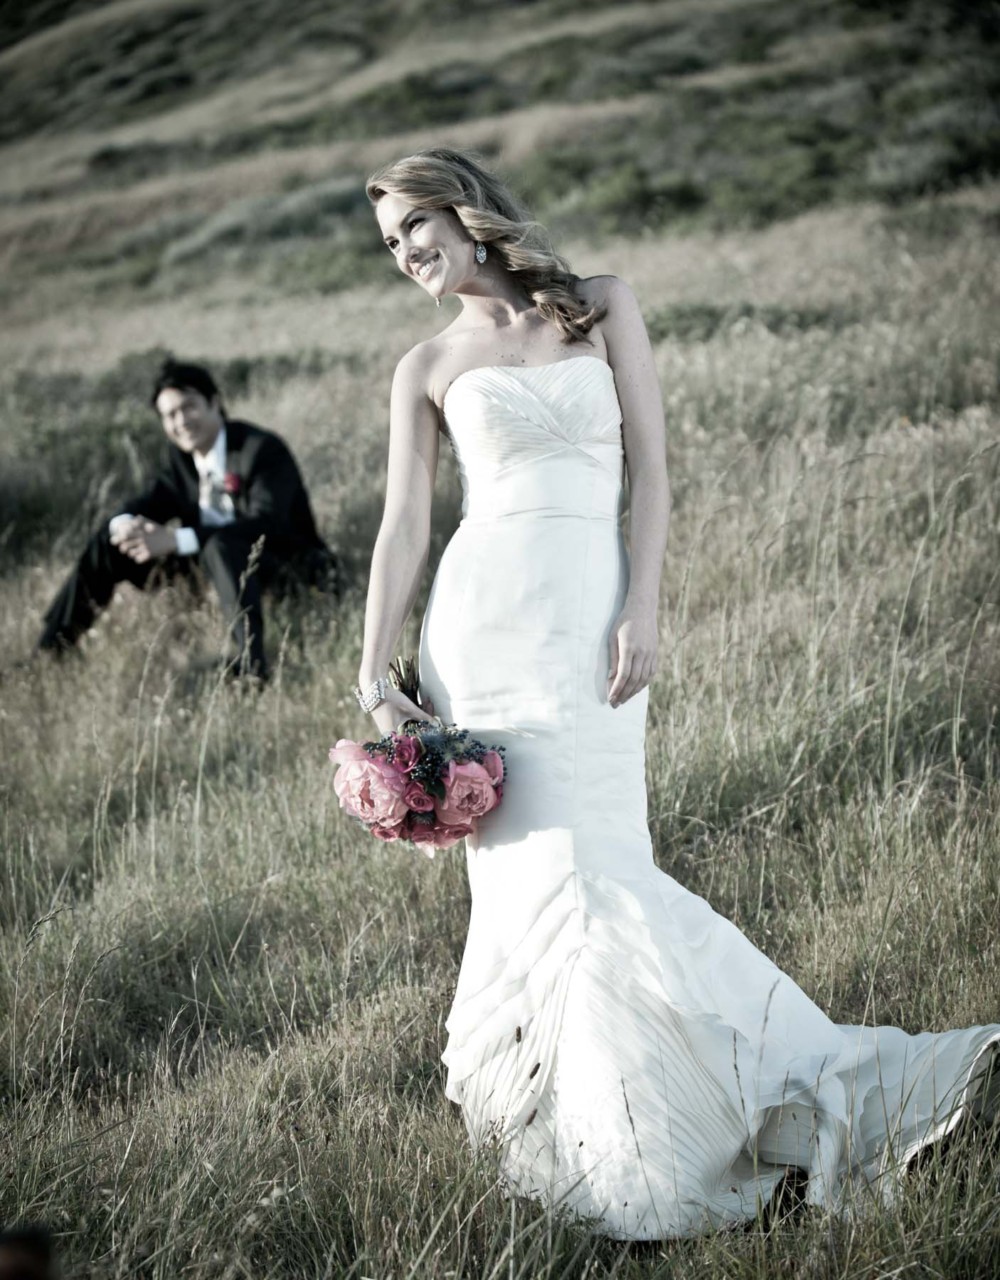 Looking for a professional wedding photographer in Eagle River?